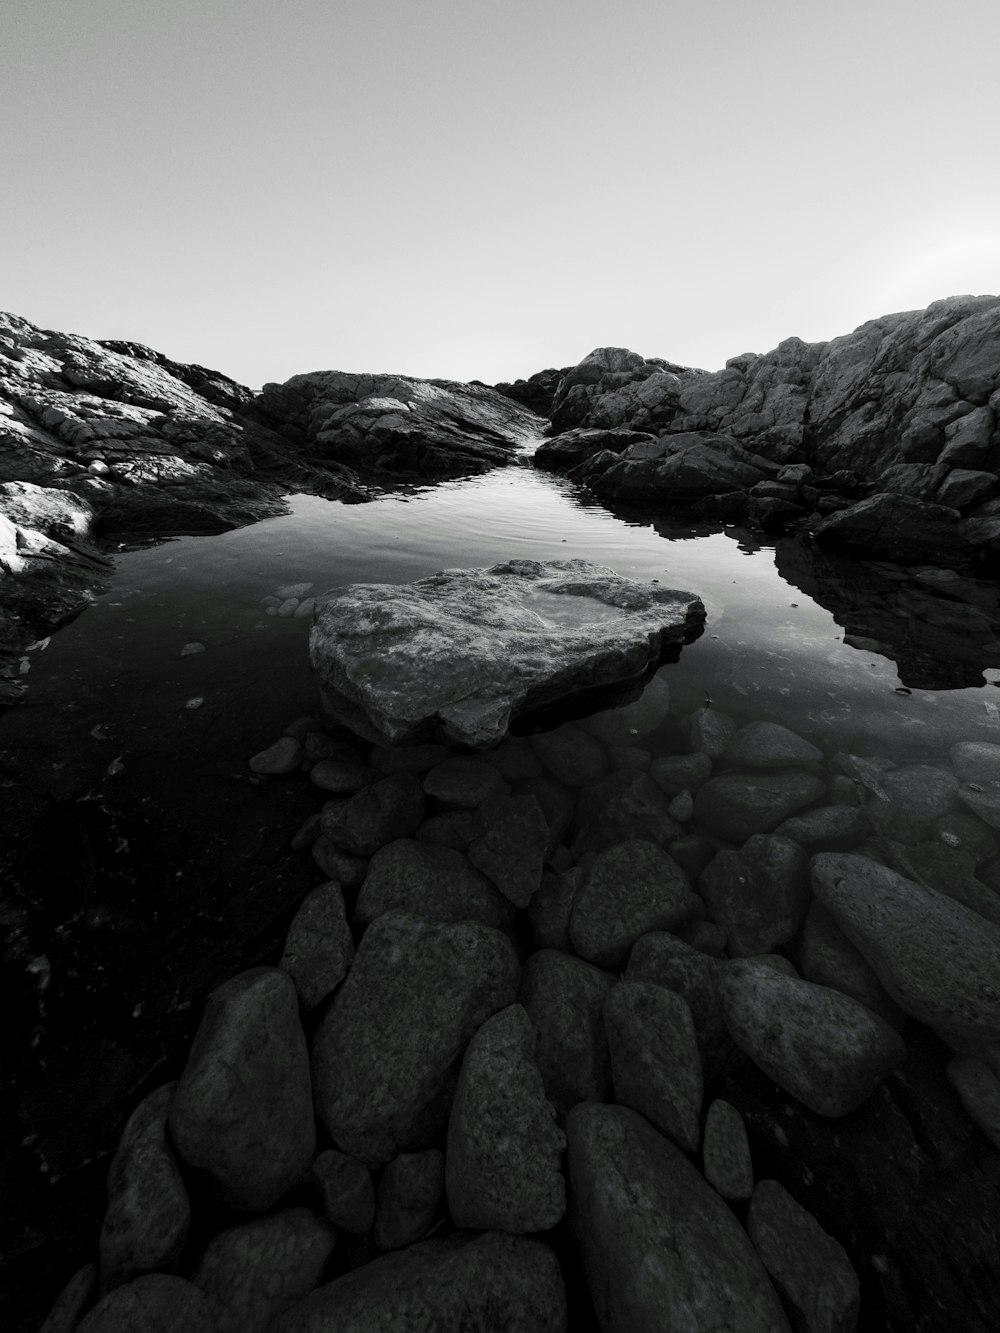 a black and white photo of rocks and water